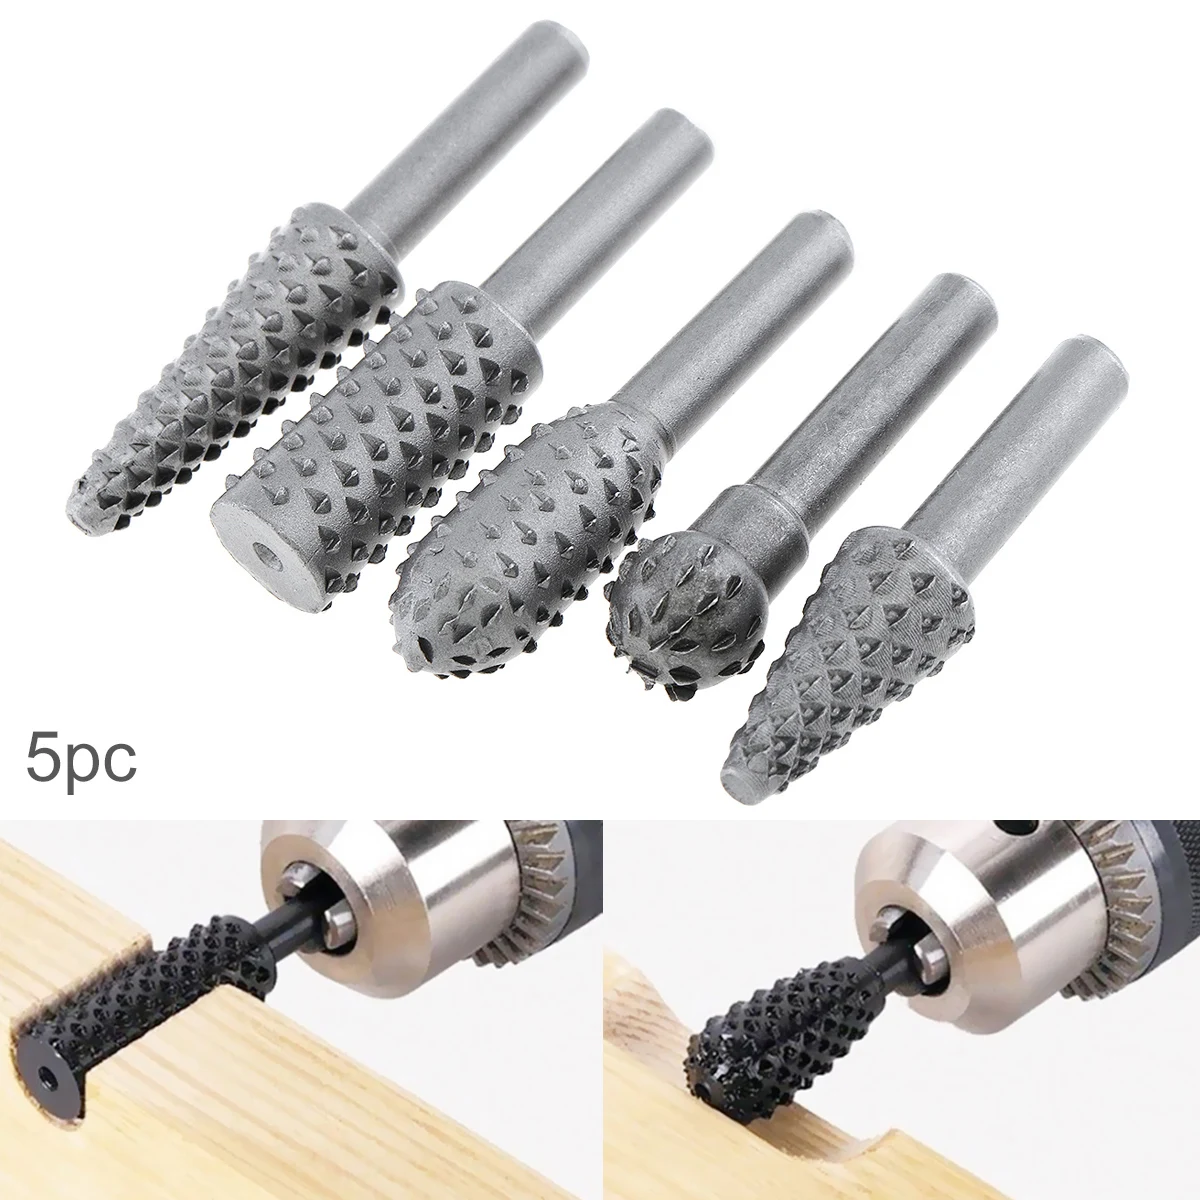 

5pcs/lot Milling Cutter Woodworking Shaped Rotary File 1 / 4" Woodworking Scythe Grinding Head